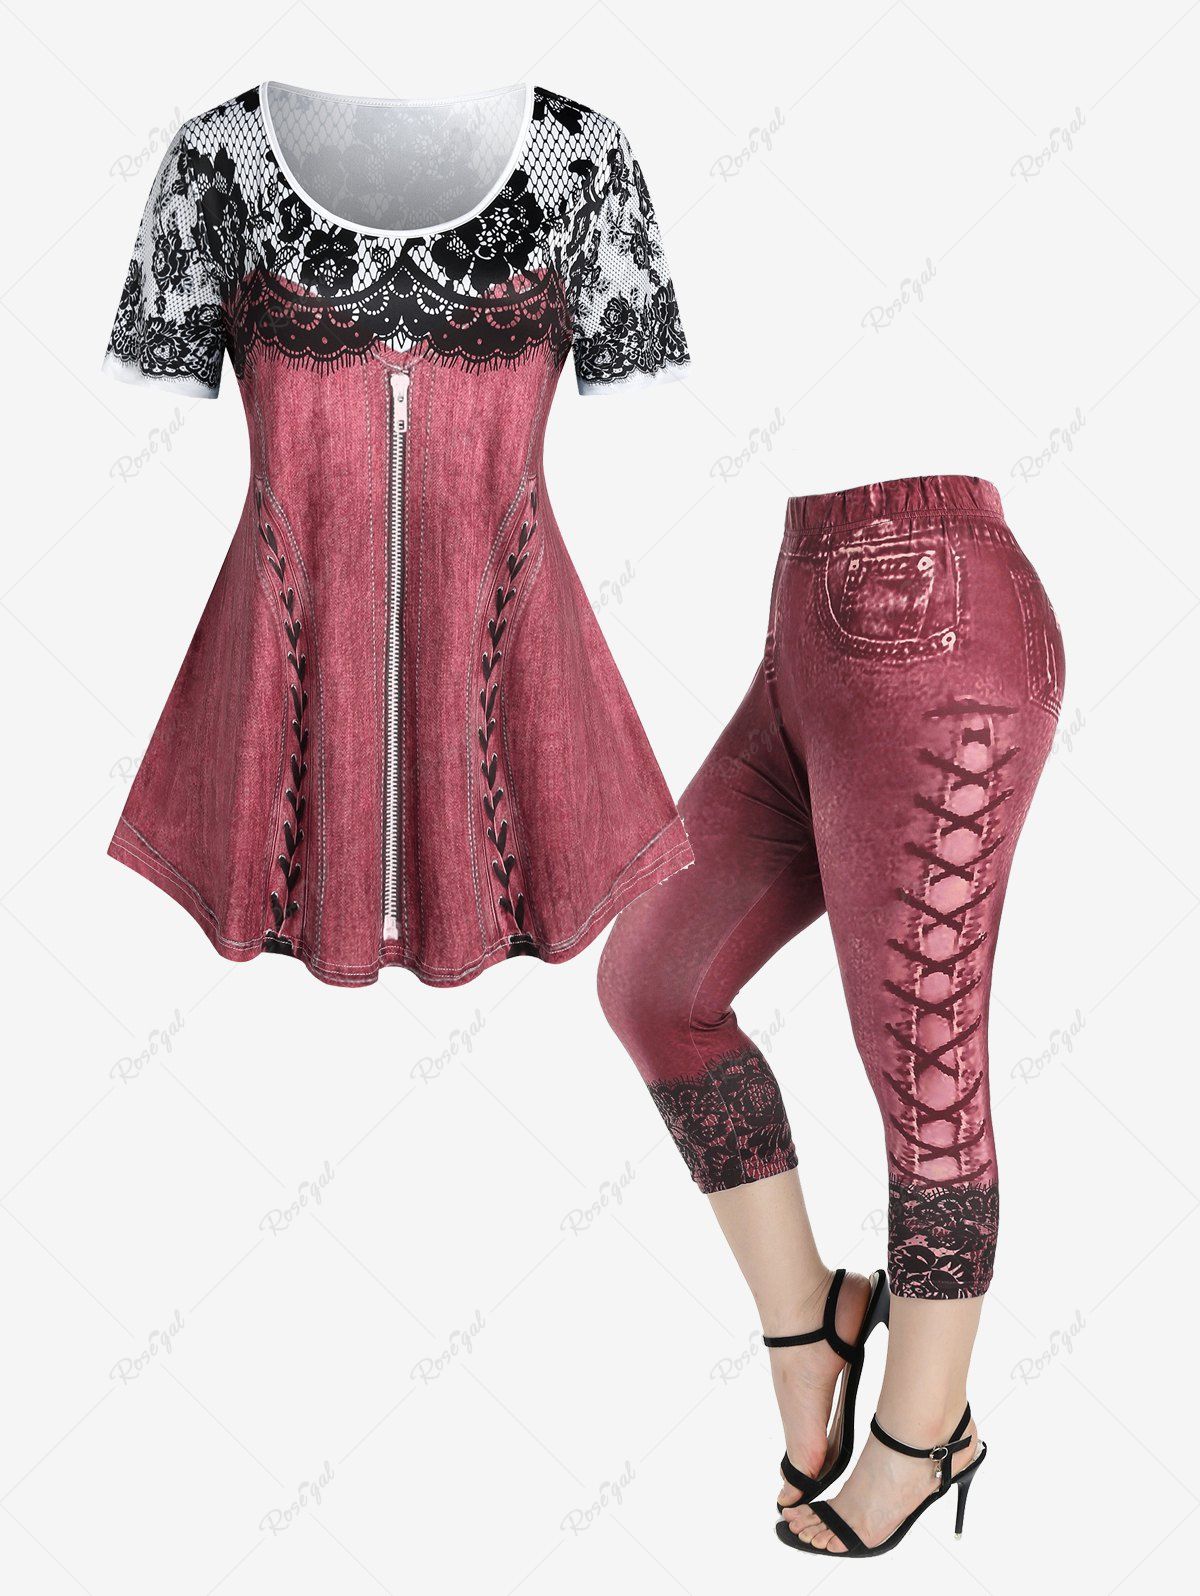 Affordable 3D Lace Denim Print Tee and Capri Jeggings Plus Size Summer Outfit  